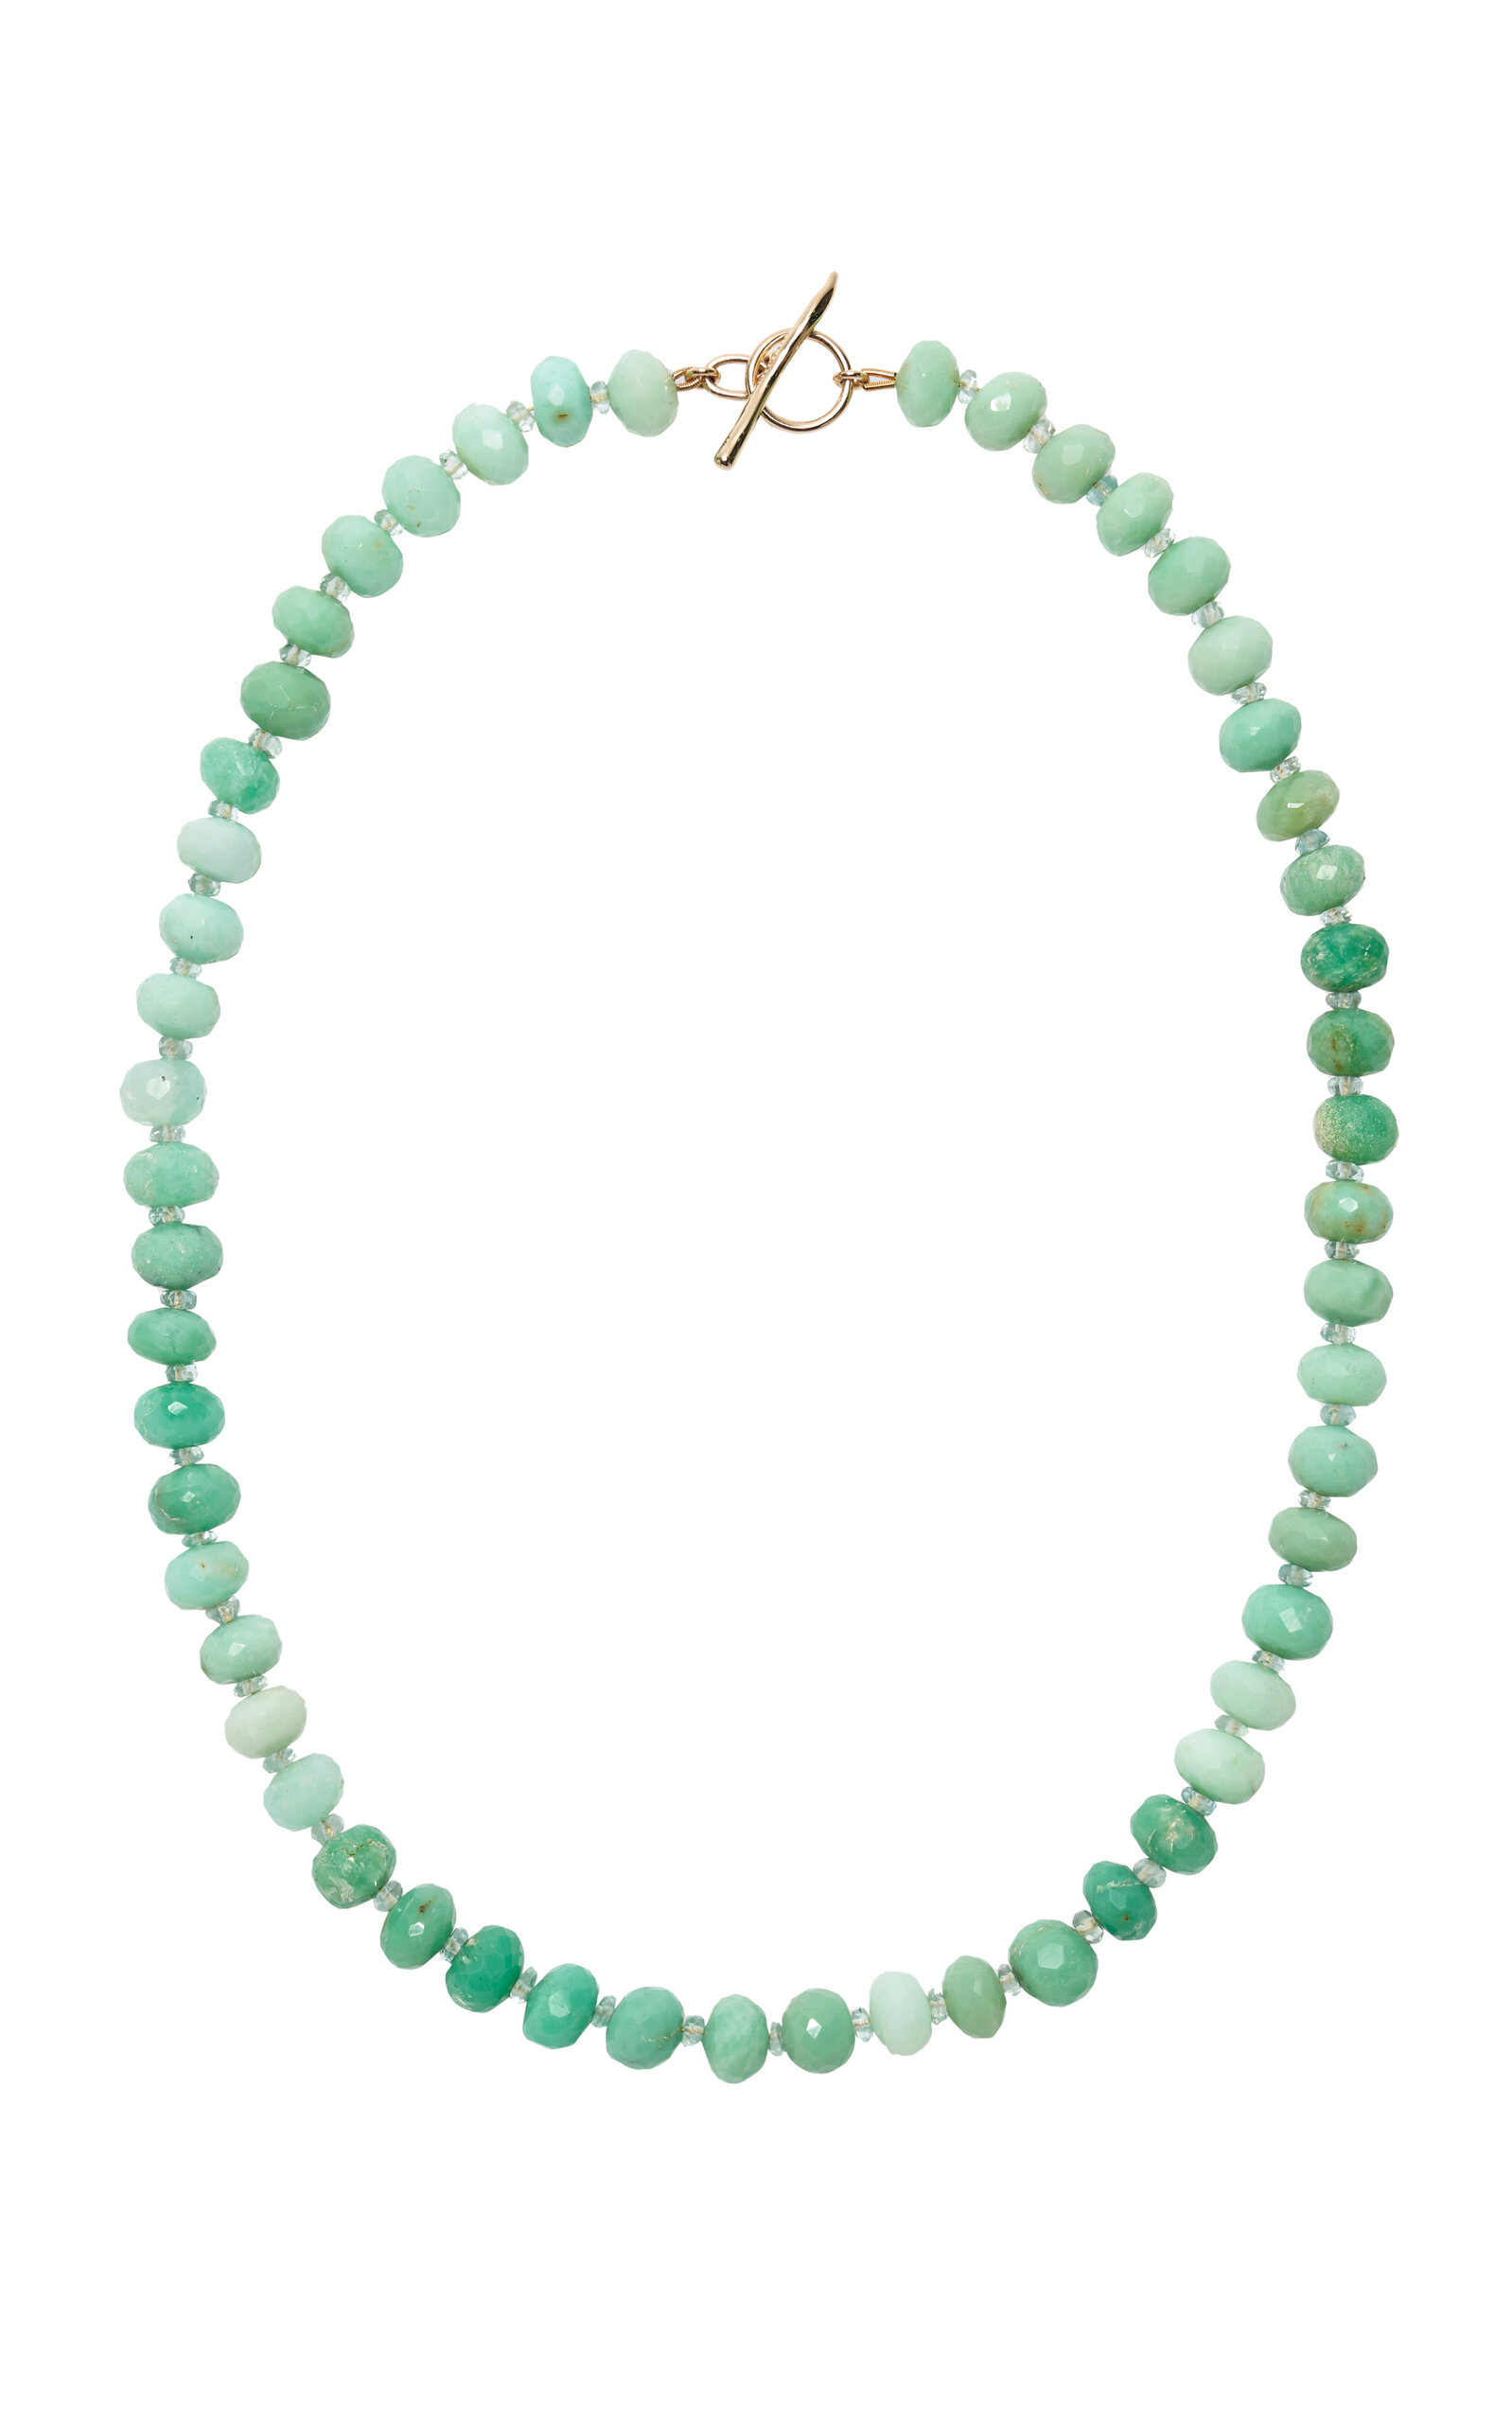 Exclusive Chrysoprase and Aquamarine 14k Gold Necklace